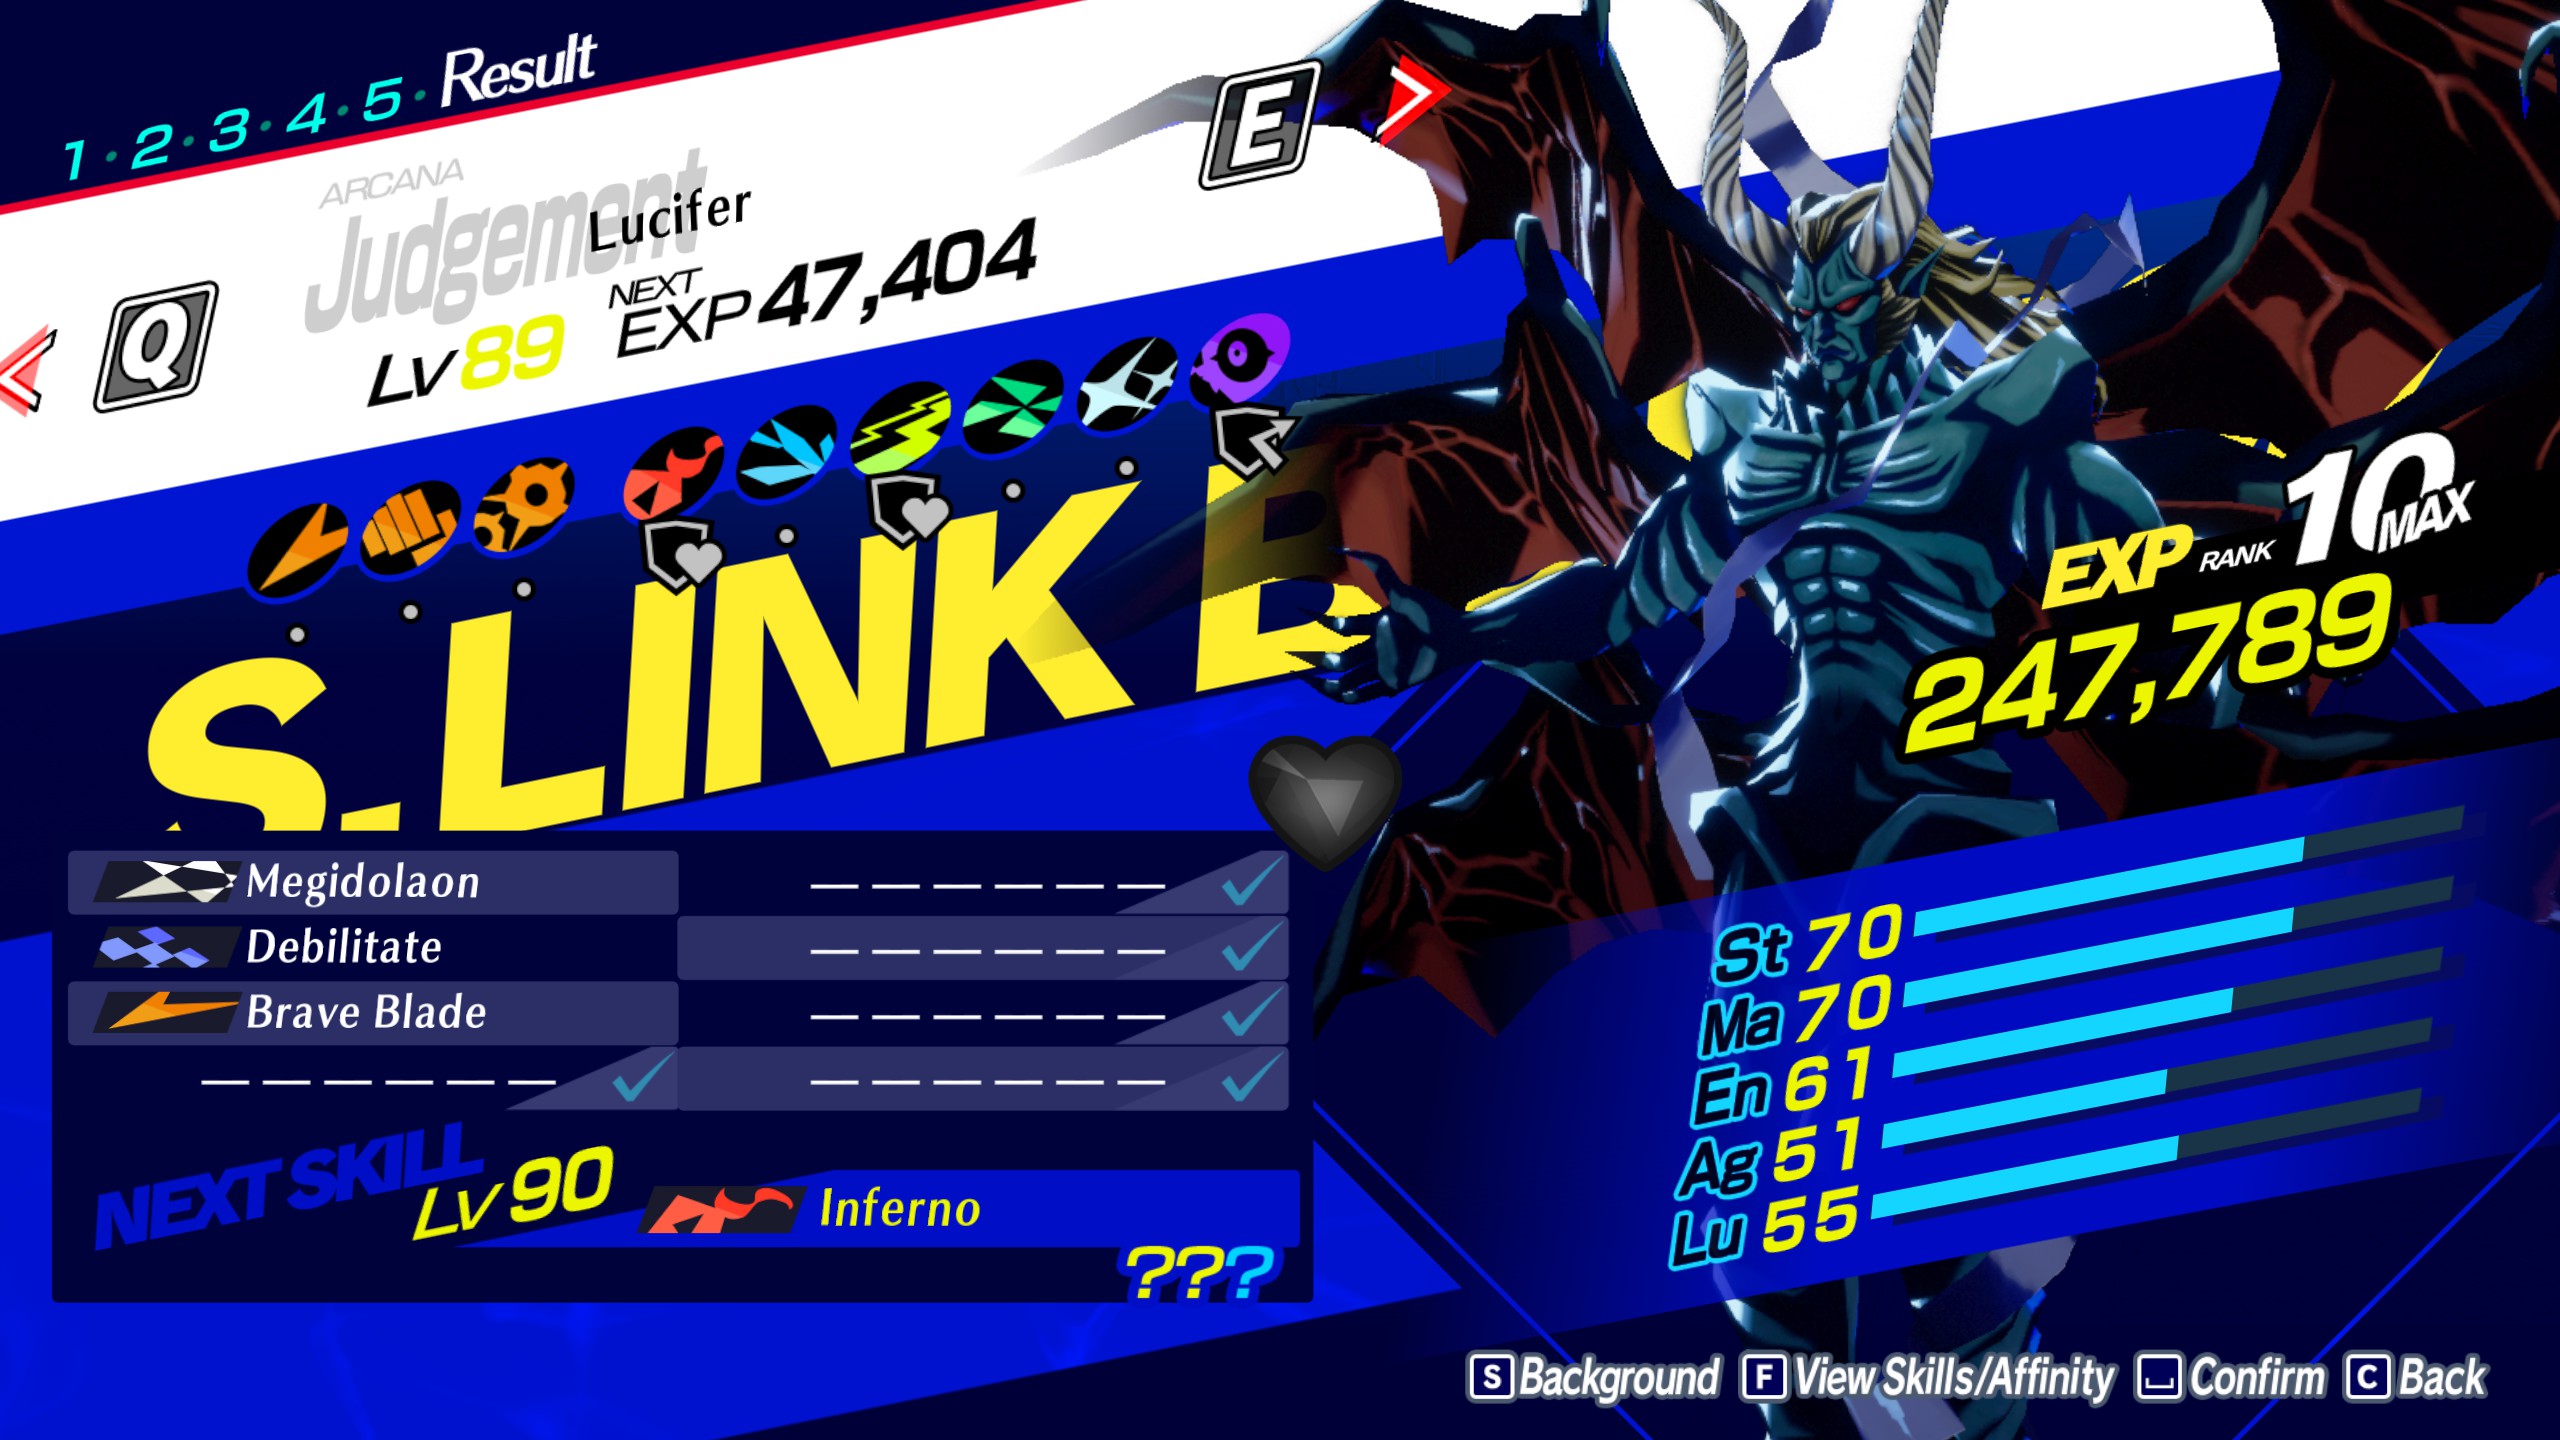 An image of the Special Fusion Lucifer in Persona 3 Reload.